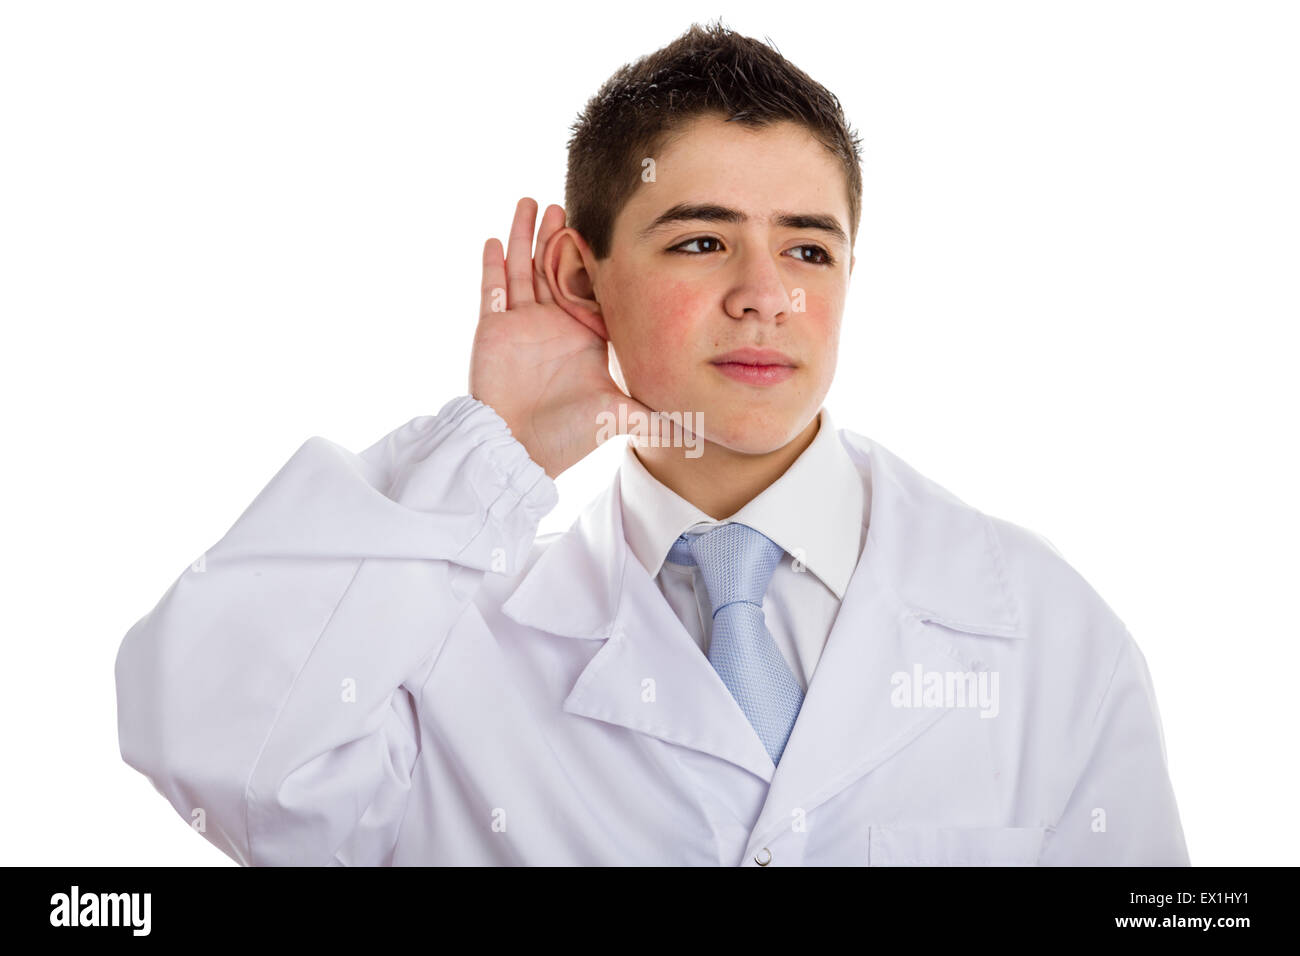 A boy doctor in white coat and blue tie helps to feel medicine more friendly: he is hearing something while holding his ear. His acne skin has not ben retouched Stock Photo